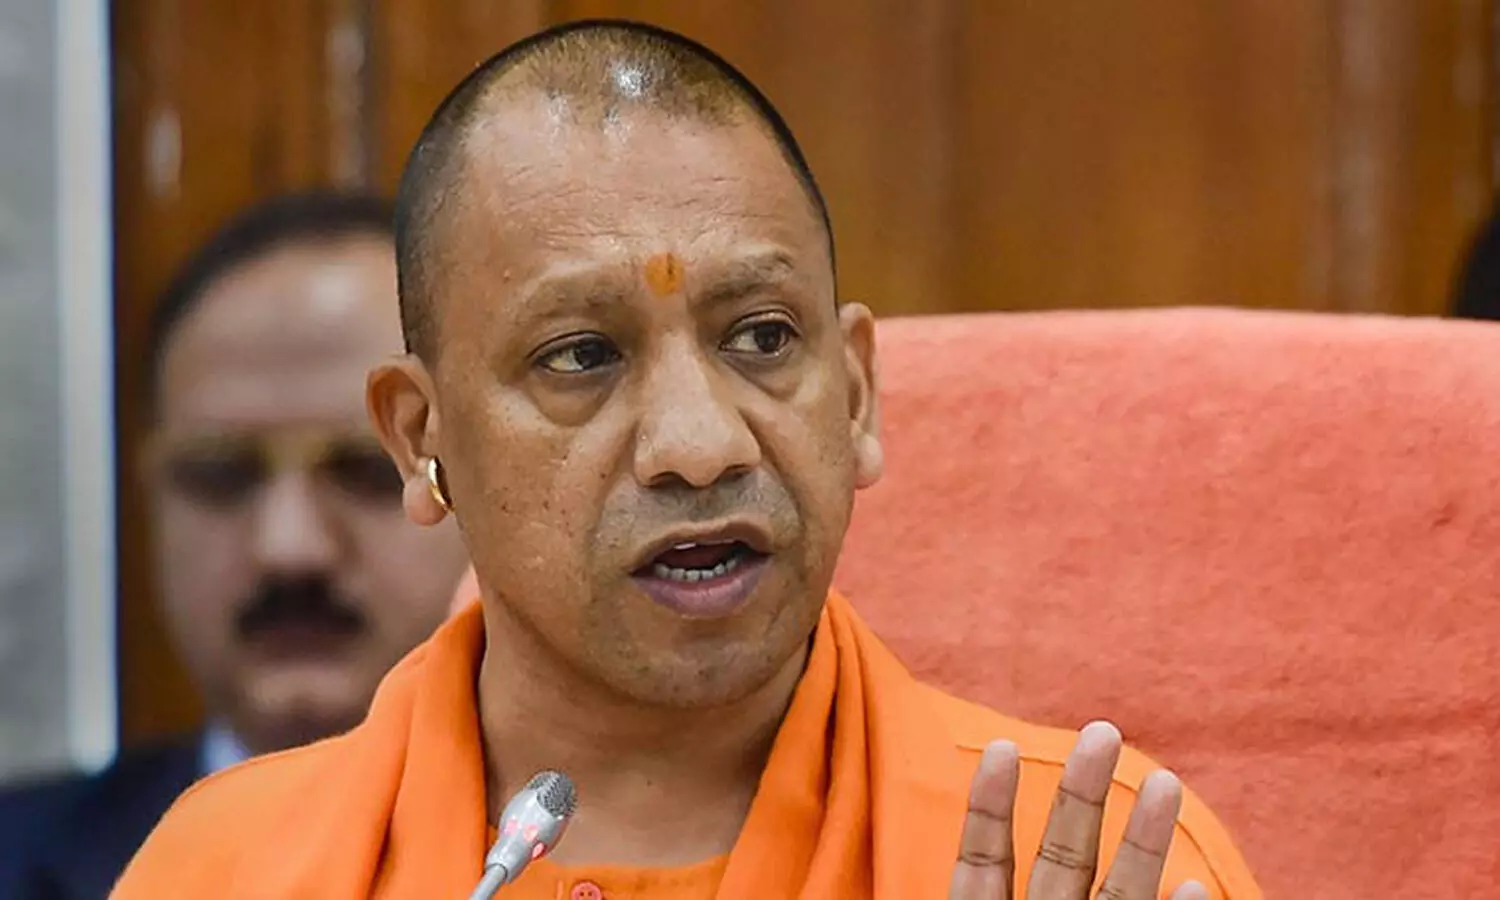 UP sees 35,614 new Covid-19 cases; 25,633 recovered: CM Yogi Adityanath